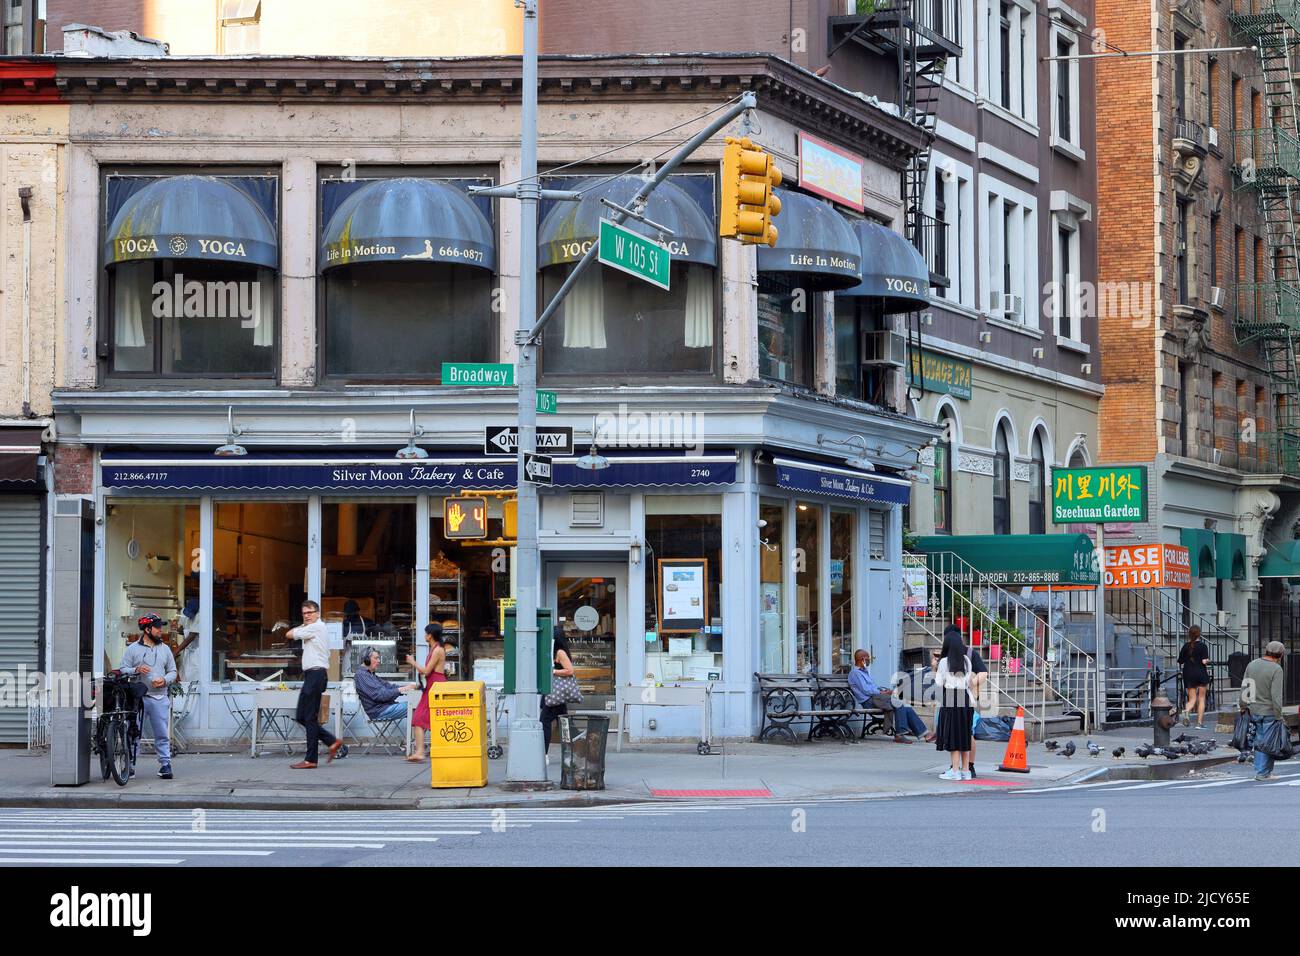 Silver Moon Bakery, 2740 Broadway. Life in Motion Yoga, 2744 Broadway. street scene on the corner of Broadway and W 105th St, New York. Stock Photo